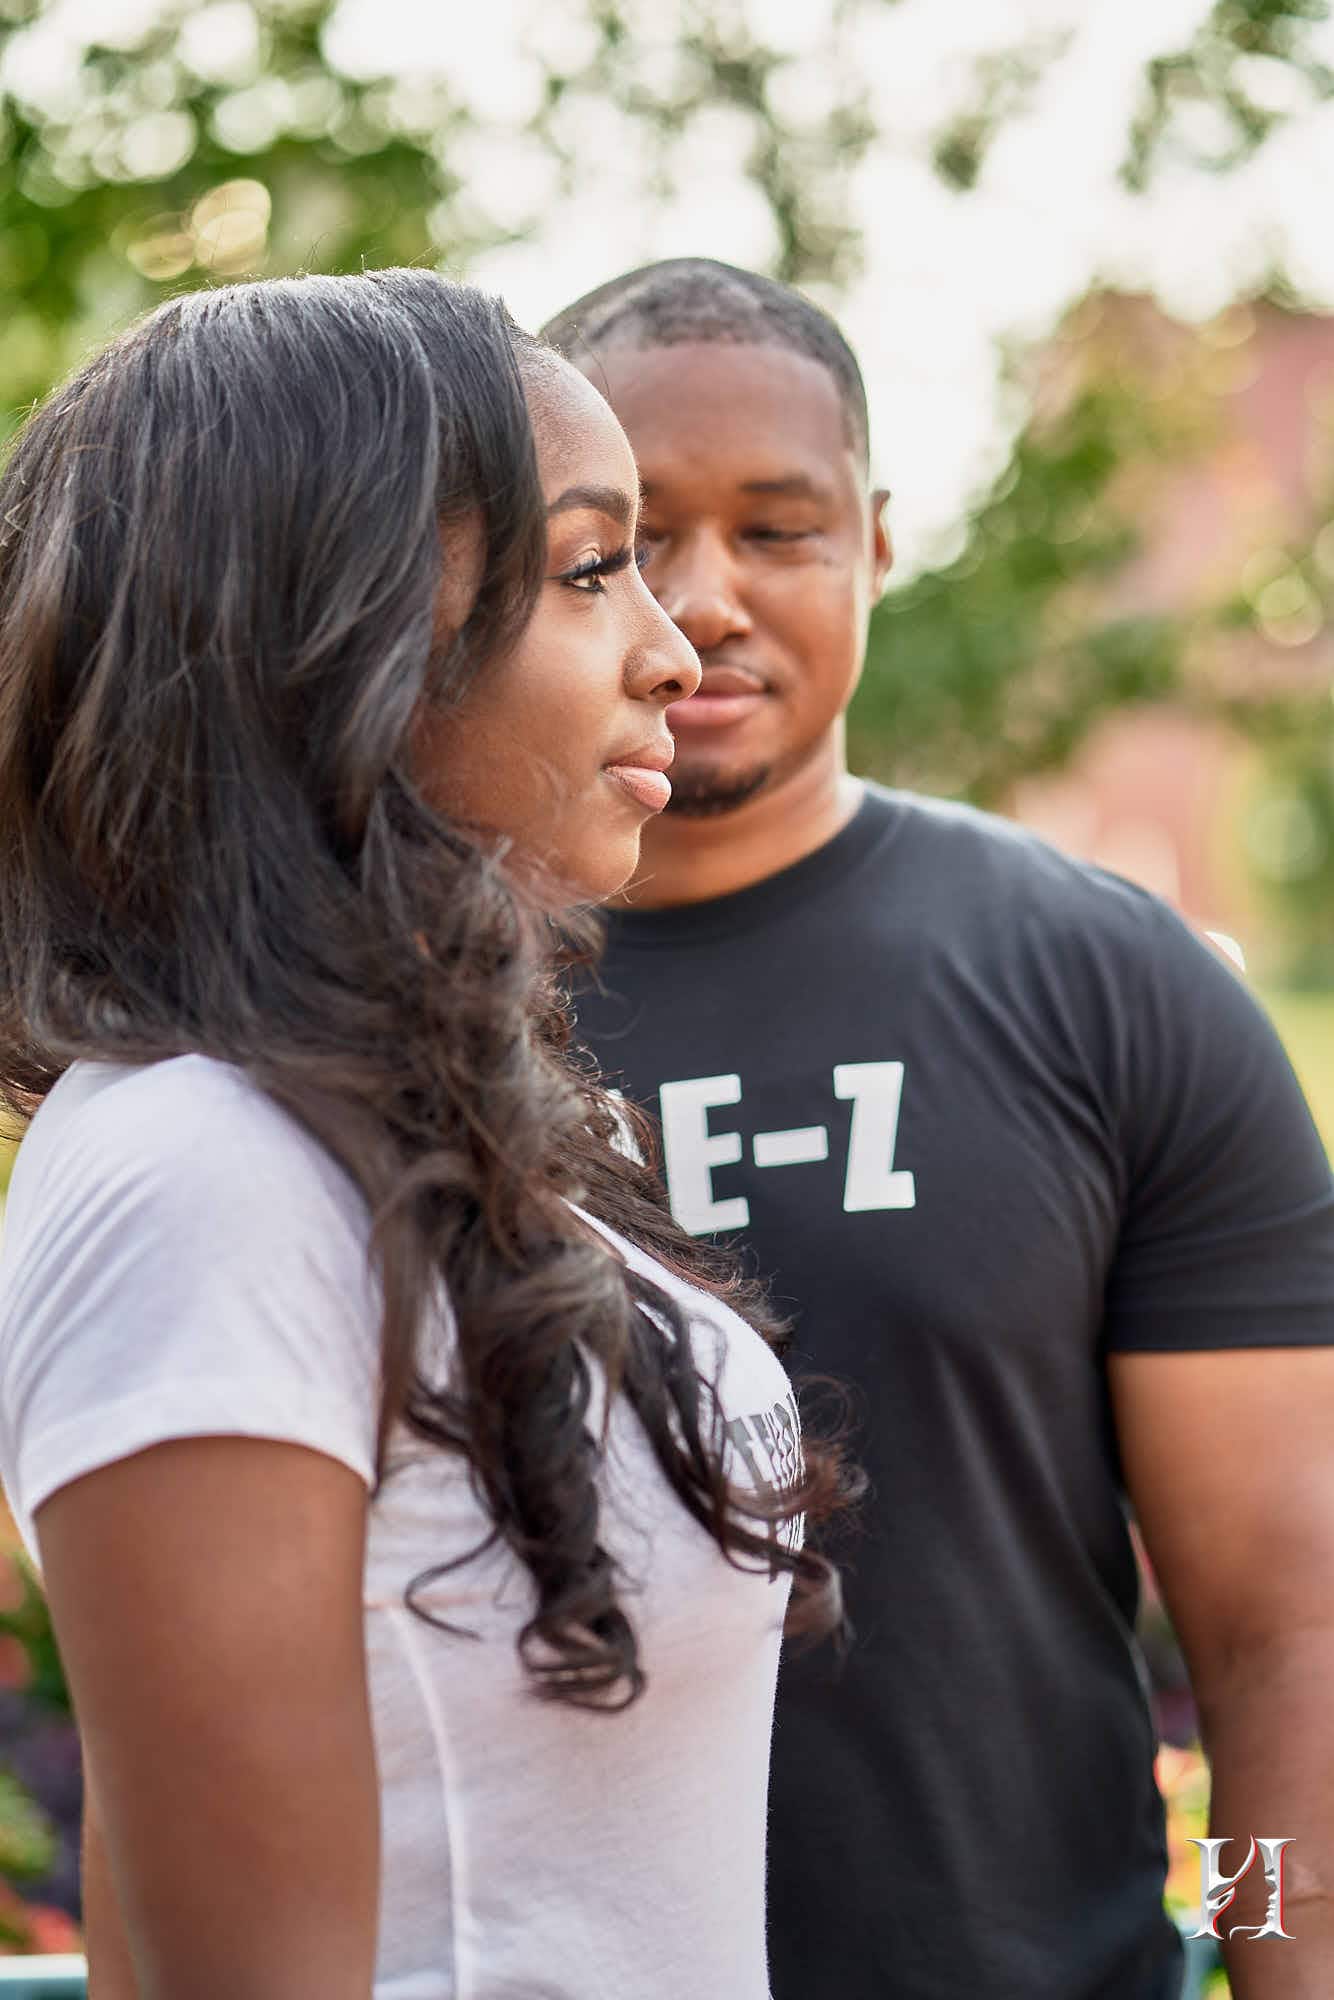 centennial olympic park engagement photography 0020